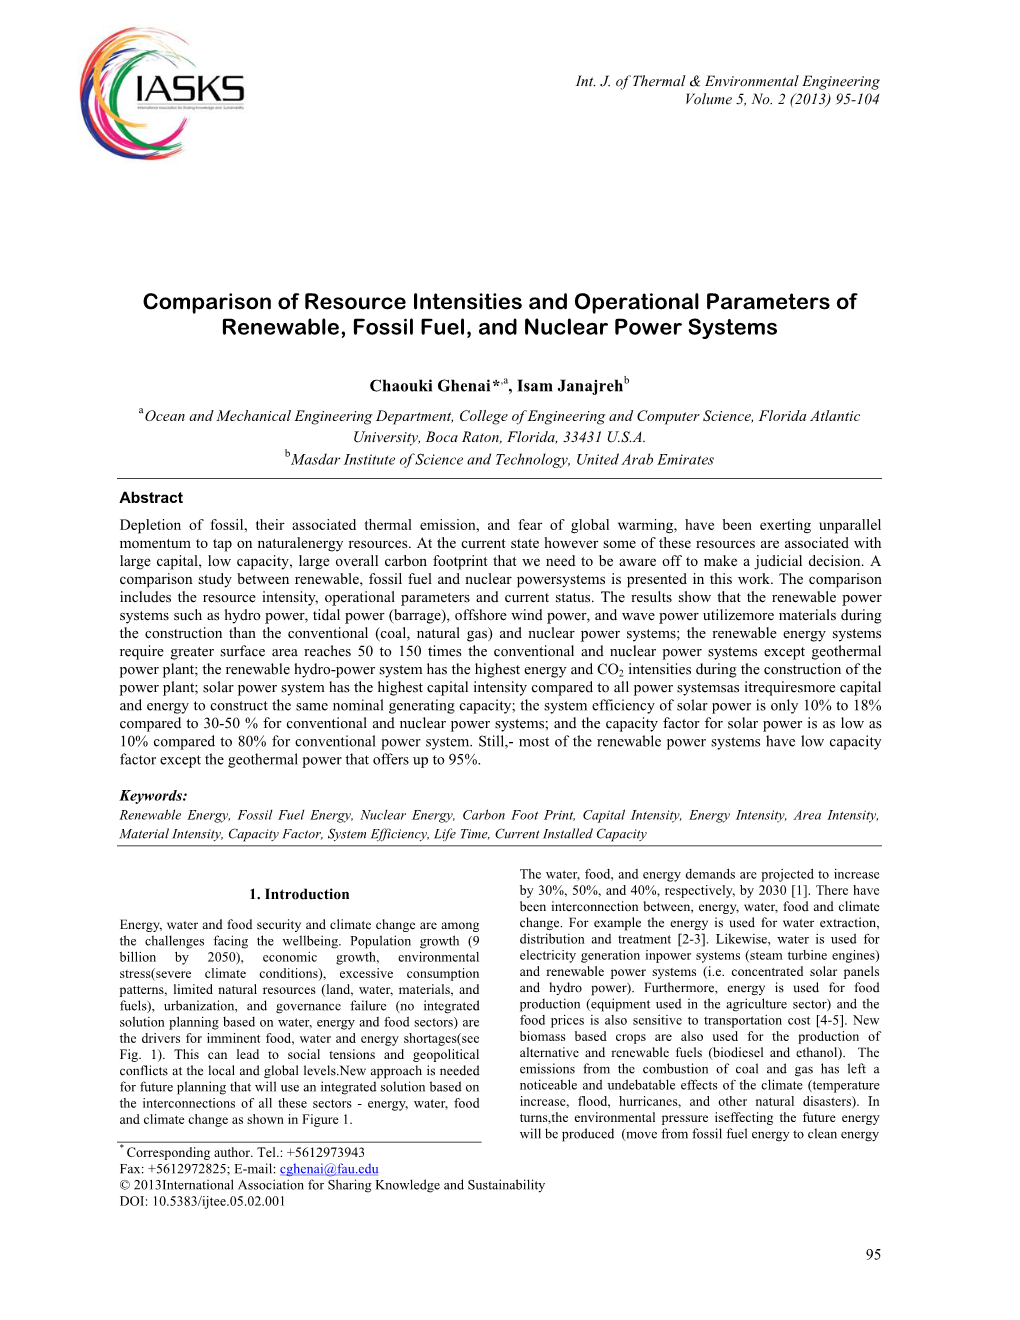 Comparison of Resource Intensities and Operational Parameters of Renewable, Fossil Fuel, and Nuclear Power Systems